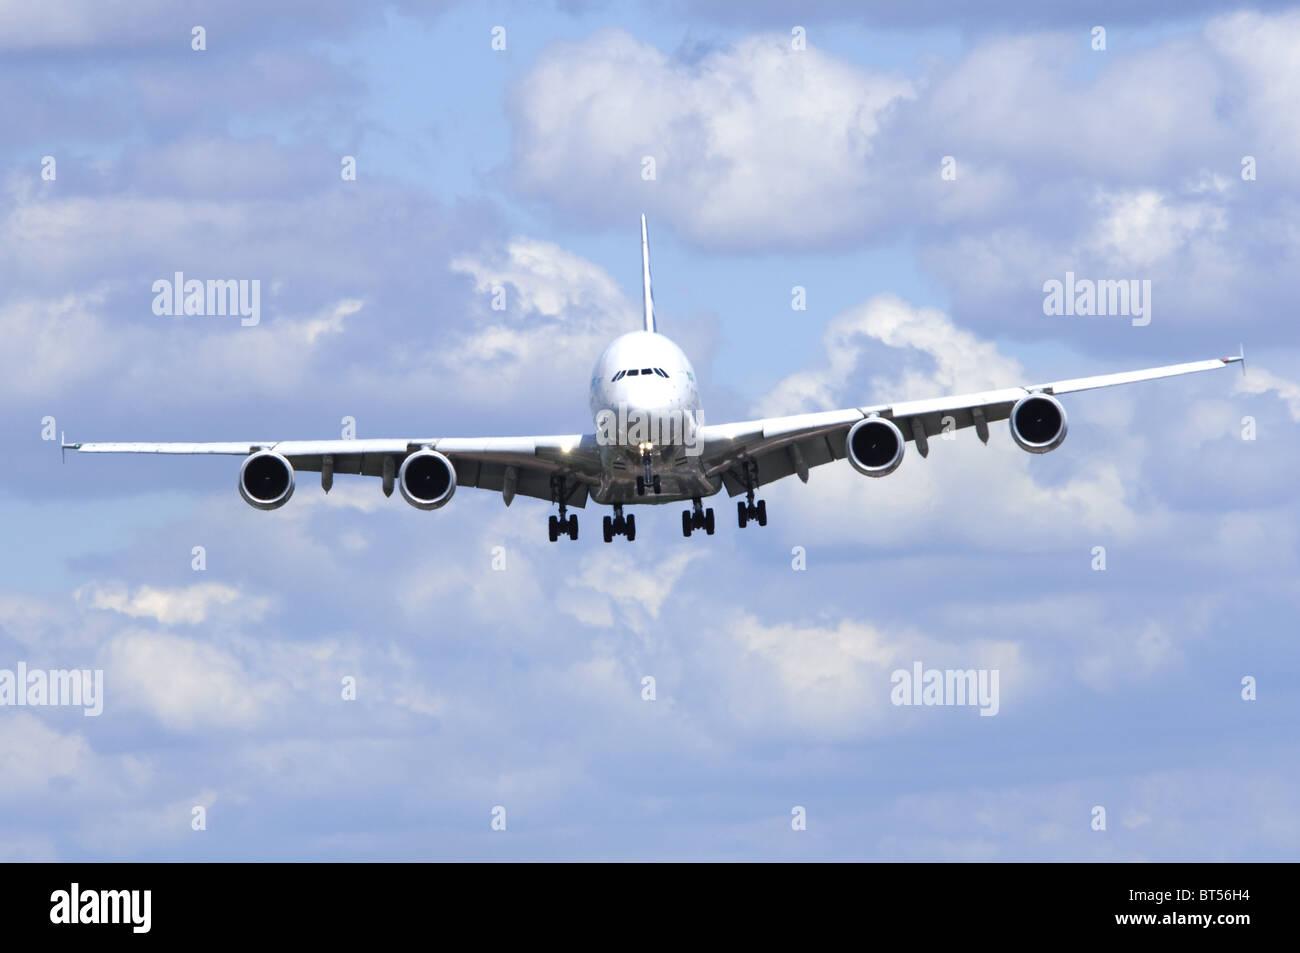 Runway approach by Airbus A380 plane seen head on on finals for landing at Farnborough Airshow, London Farnborough Airport, UK. Stock Photo